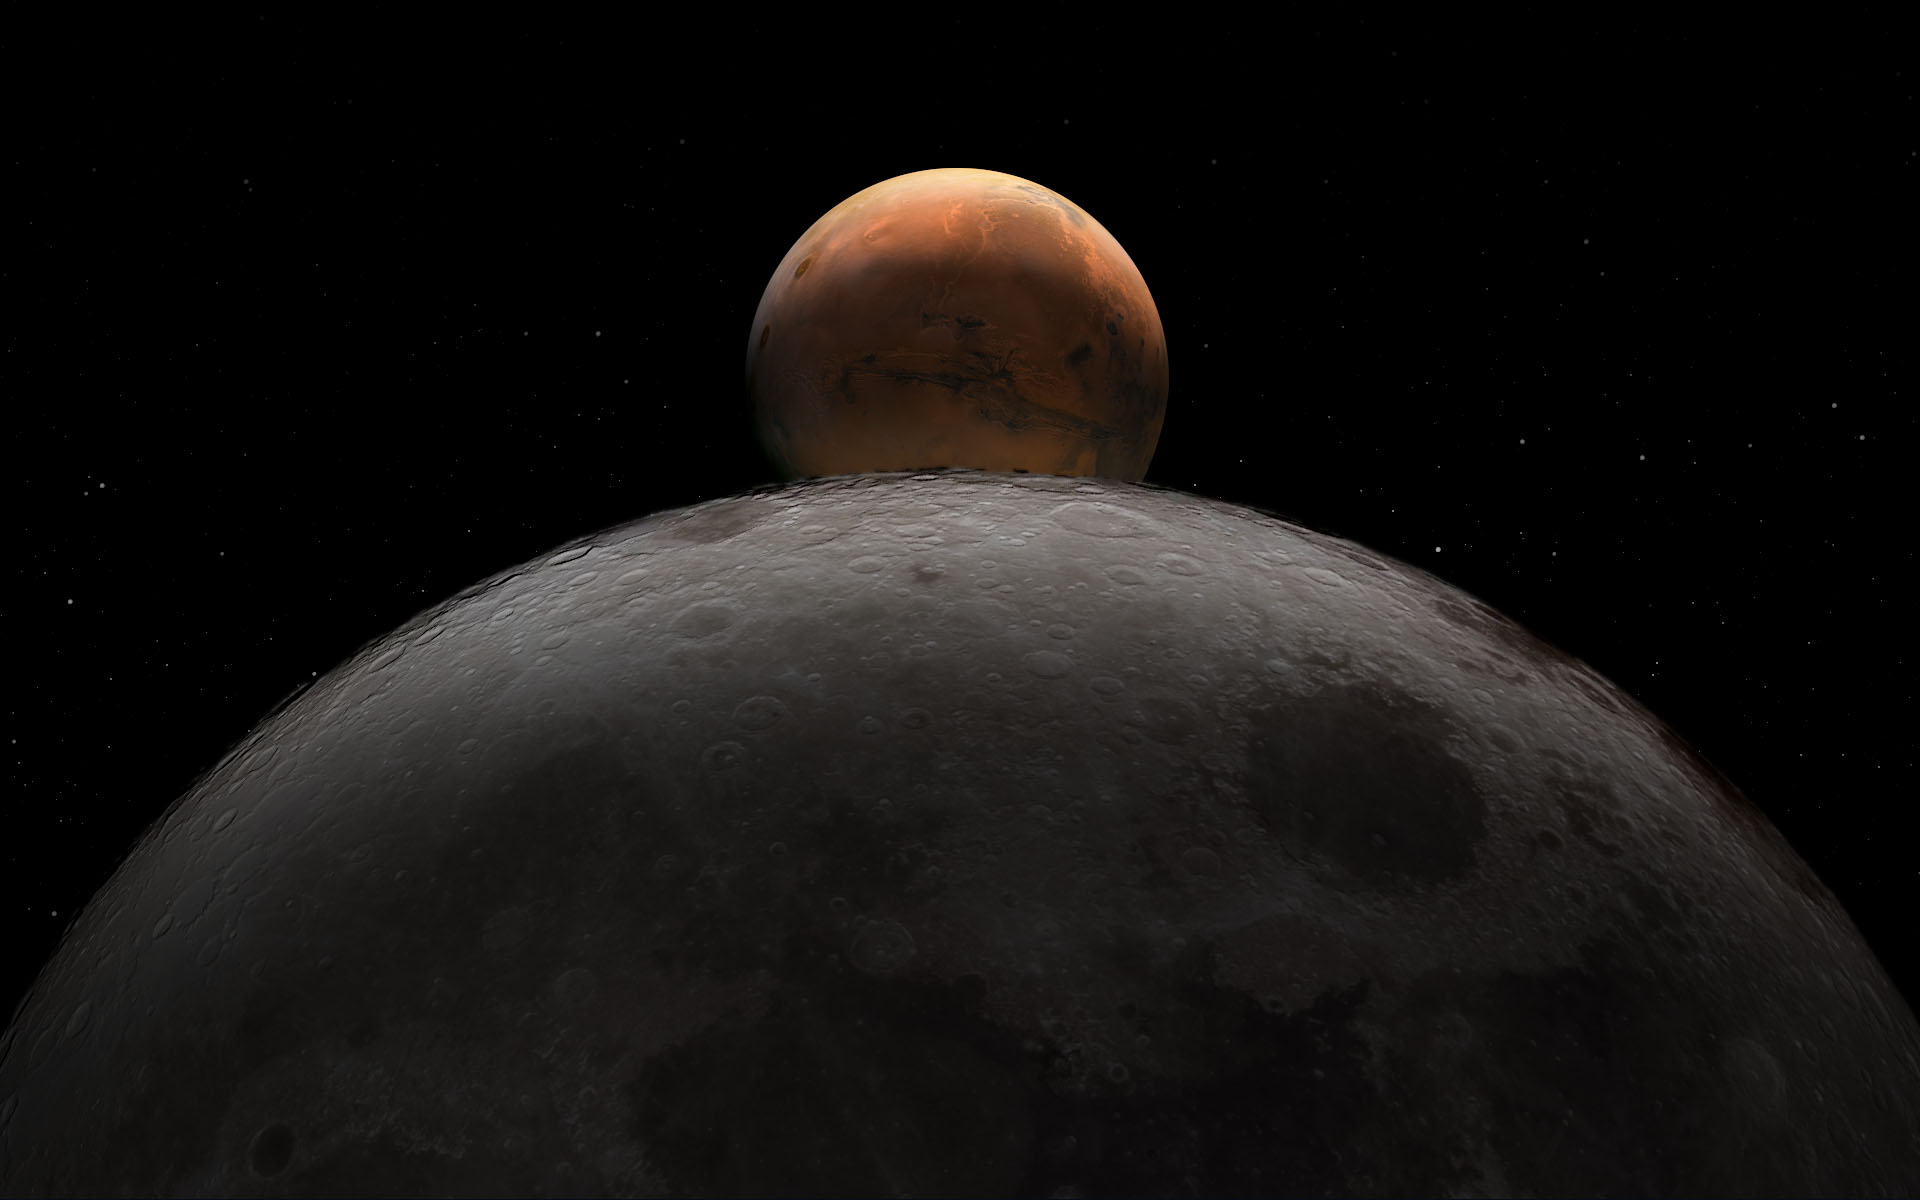 A generated rendition of Earth's Moon just barely glowing in the front of the image as Mars is highlighted behind it.